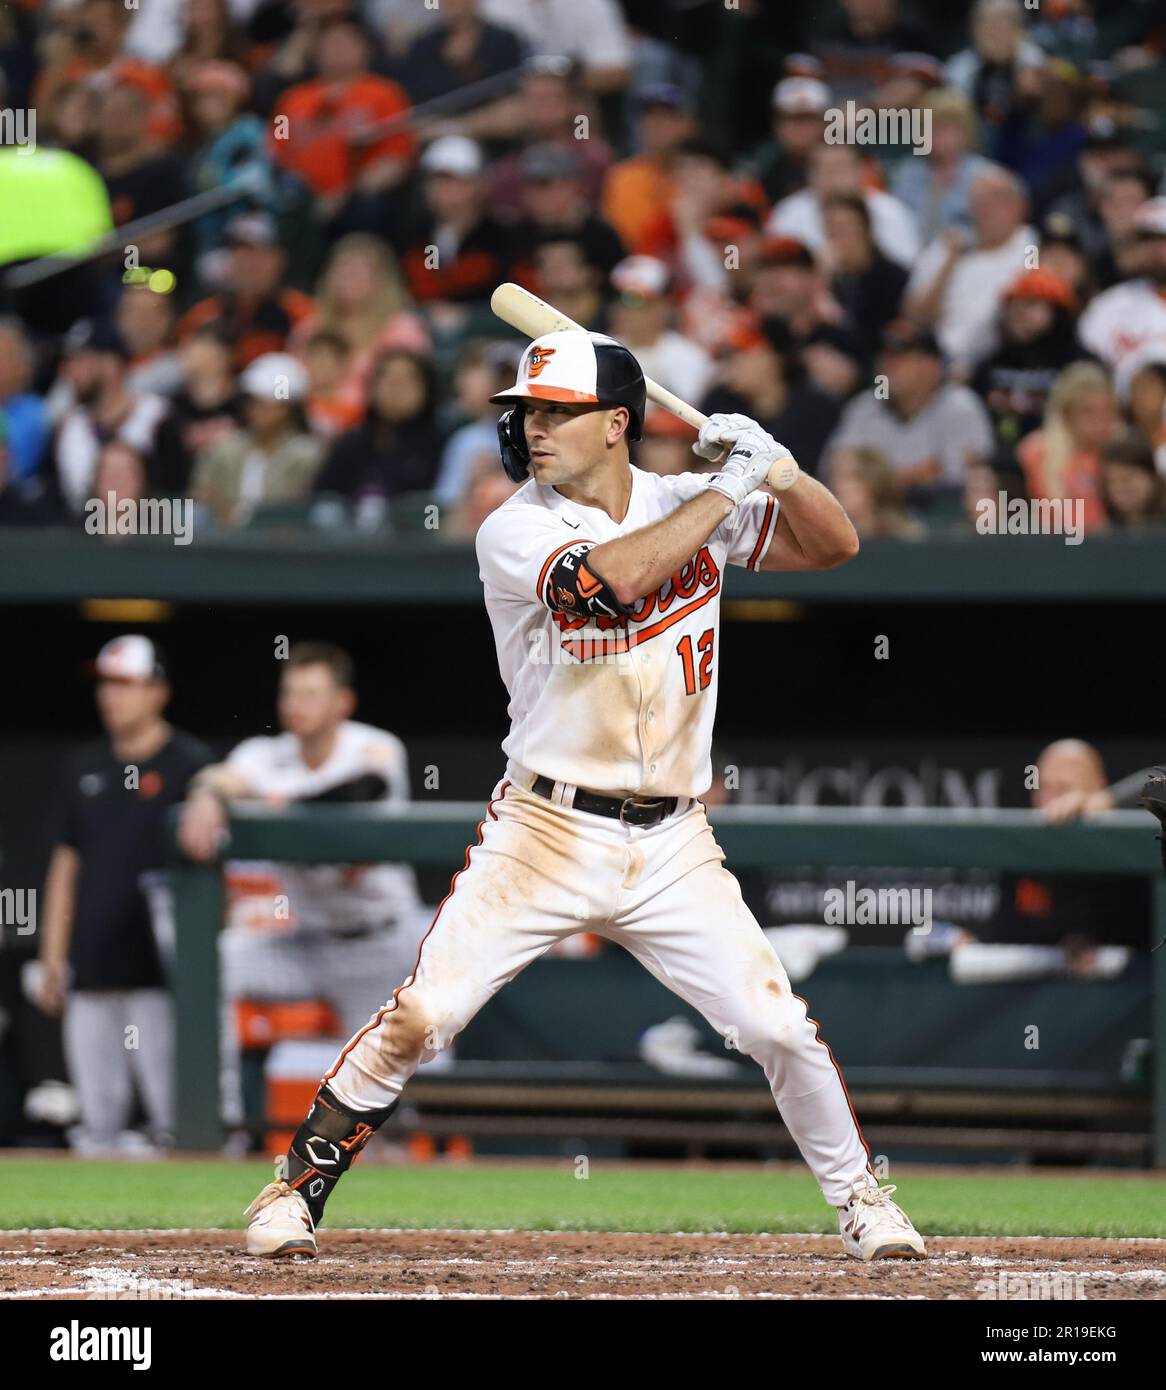 Baltimore Orioles' second baseman Adam Frazier (12) hits a ground ball into  a force play at second but makes it safely to first, driving in a run in  the bottom of the